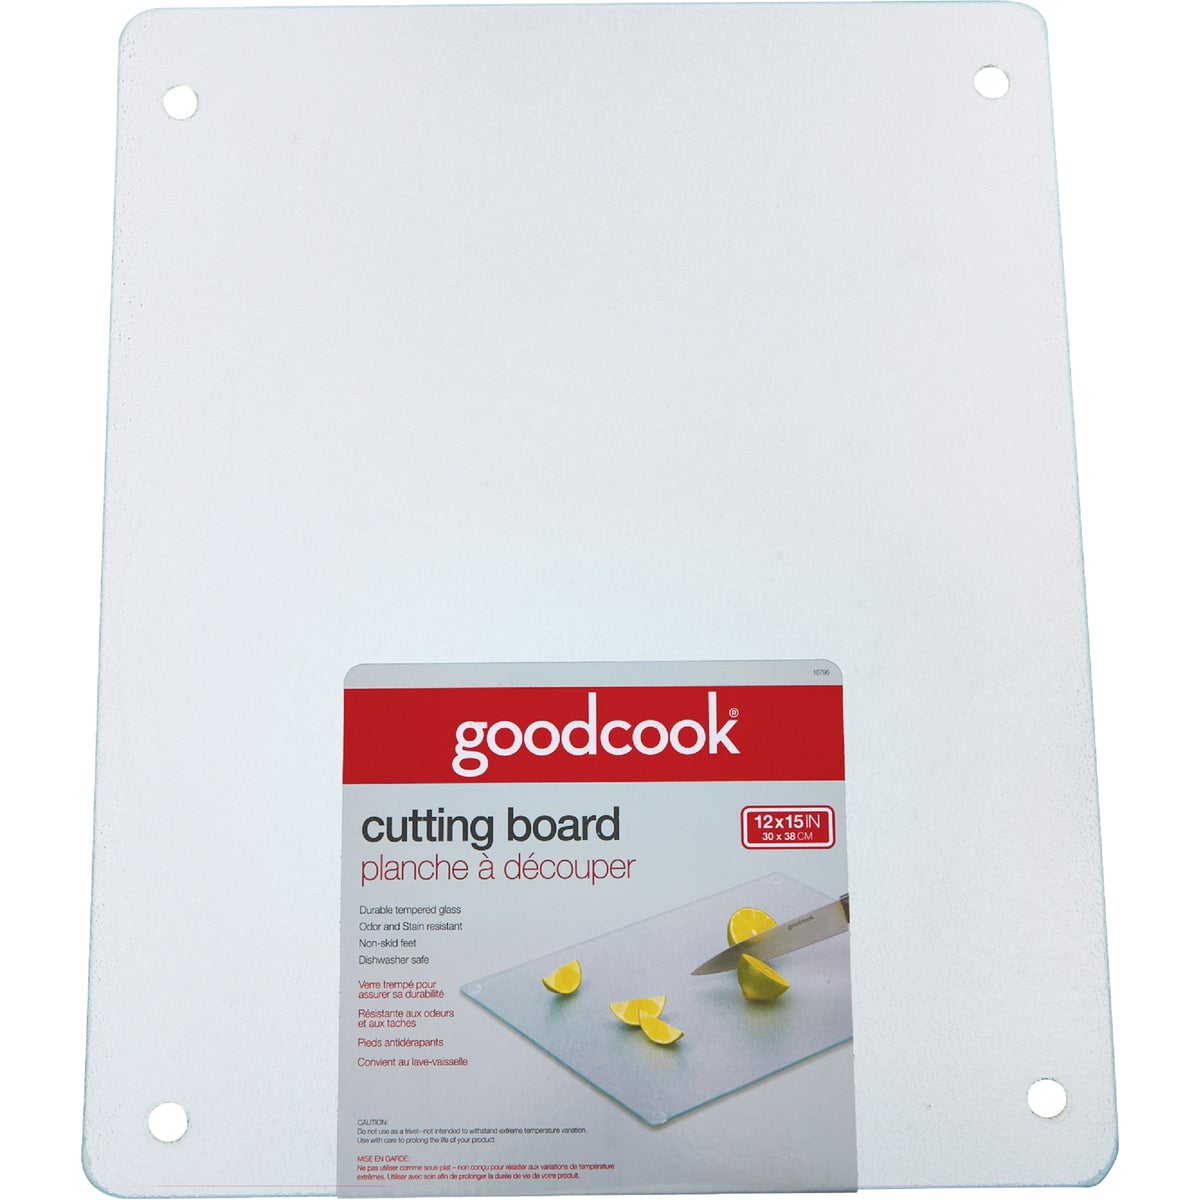 Goodcook 10796 Goodcook 12 In. x 15 In. Silver Tempered Glass Cutting Board 10796